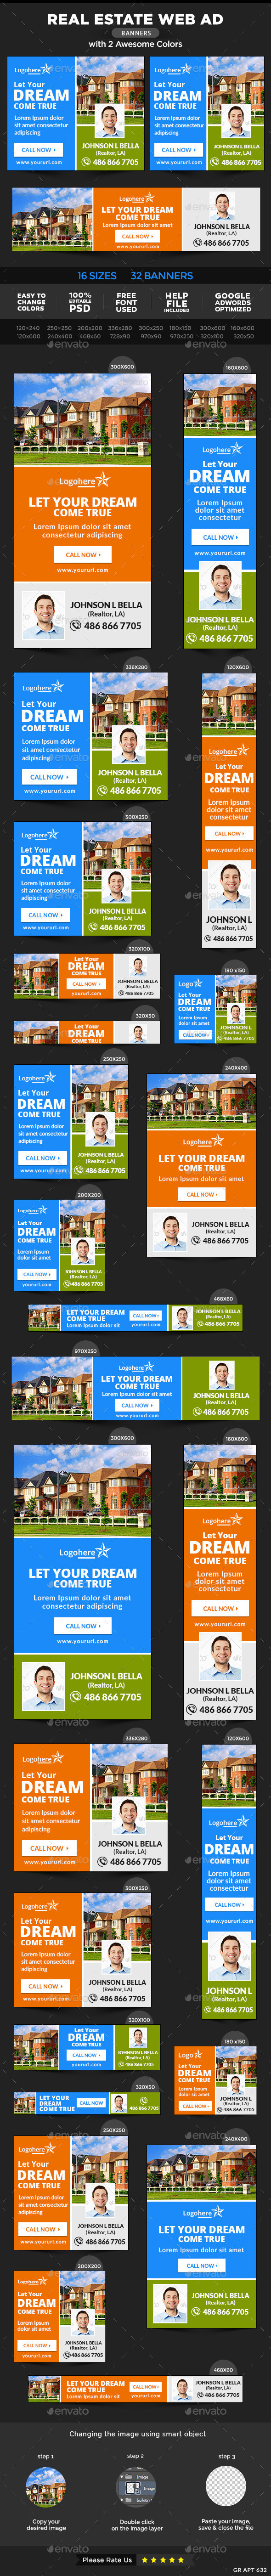 Apt 632 real 20estate 20web 20banners preview